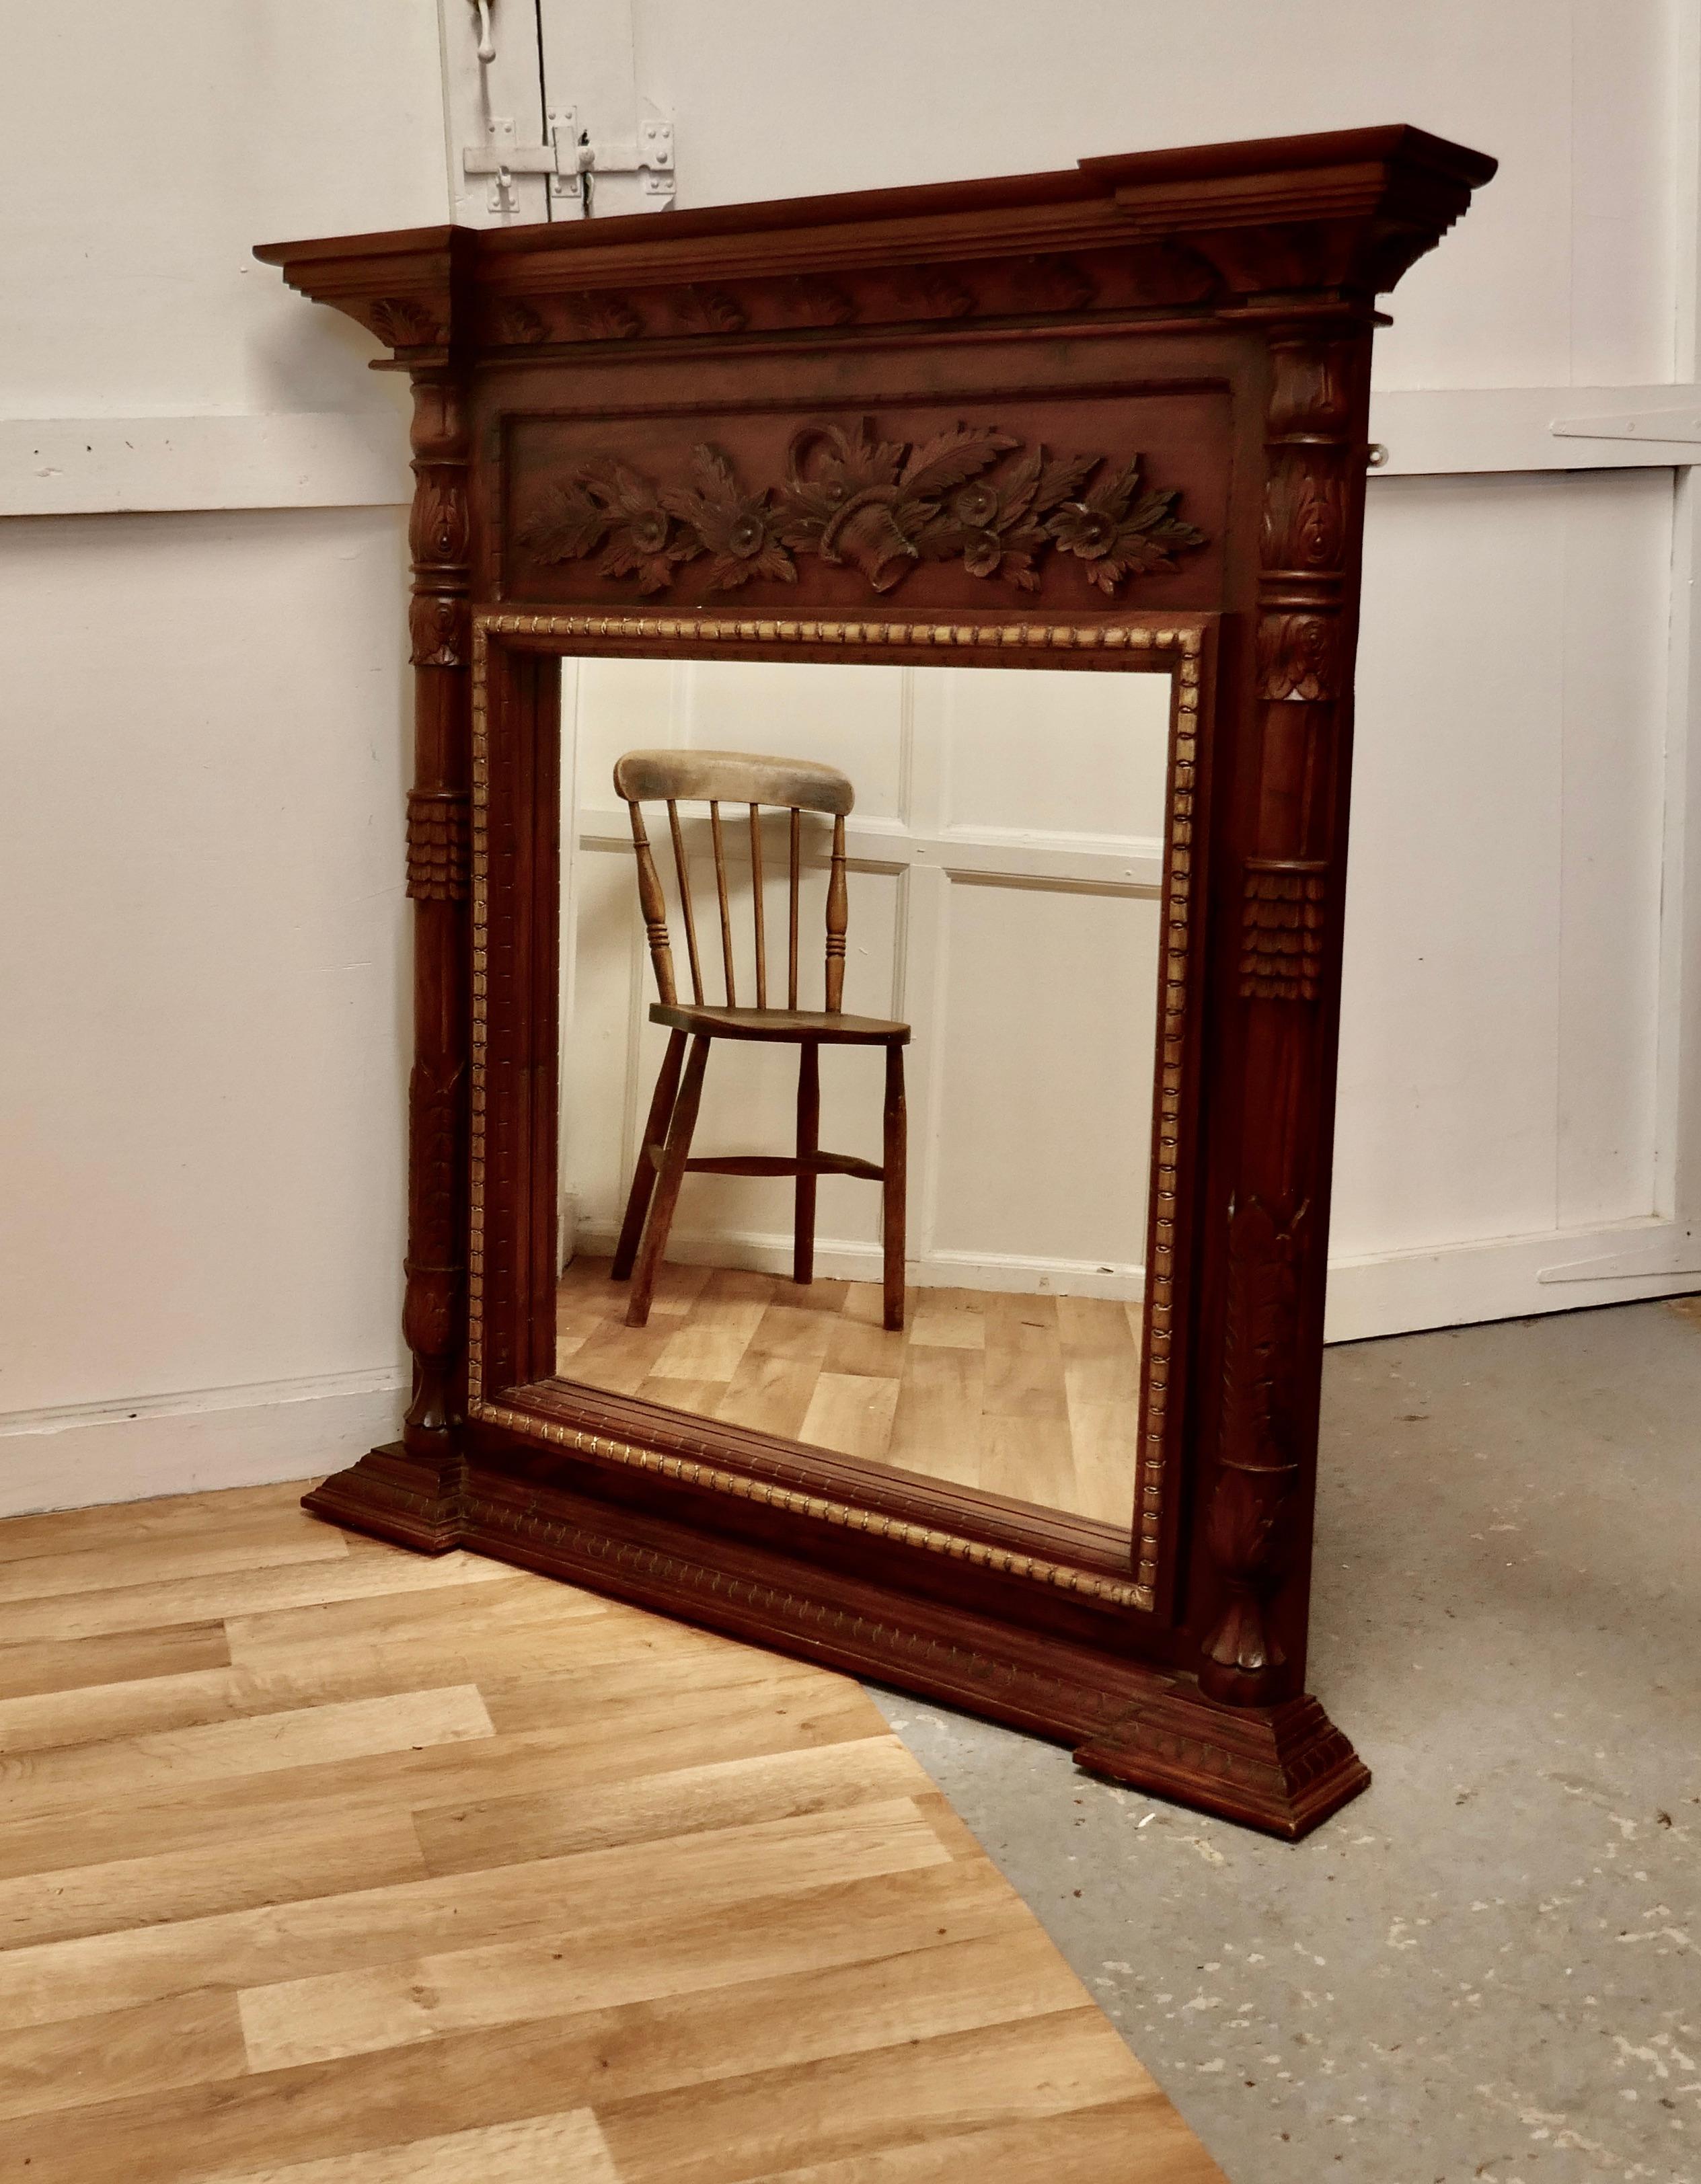 A very large carved fruitwood overmantel or wall mirror.

This is a very large mirror the frame has a carved decoration at the top, a gilded border around the glass. It has a turned column at each side and a deep cornice matching the stepped base